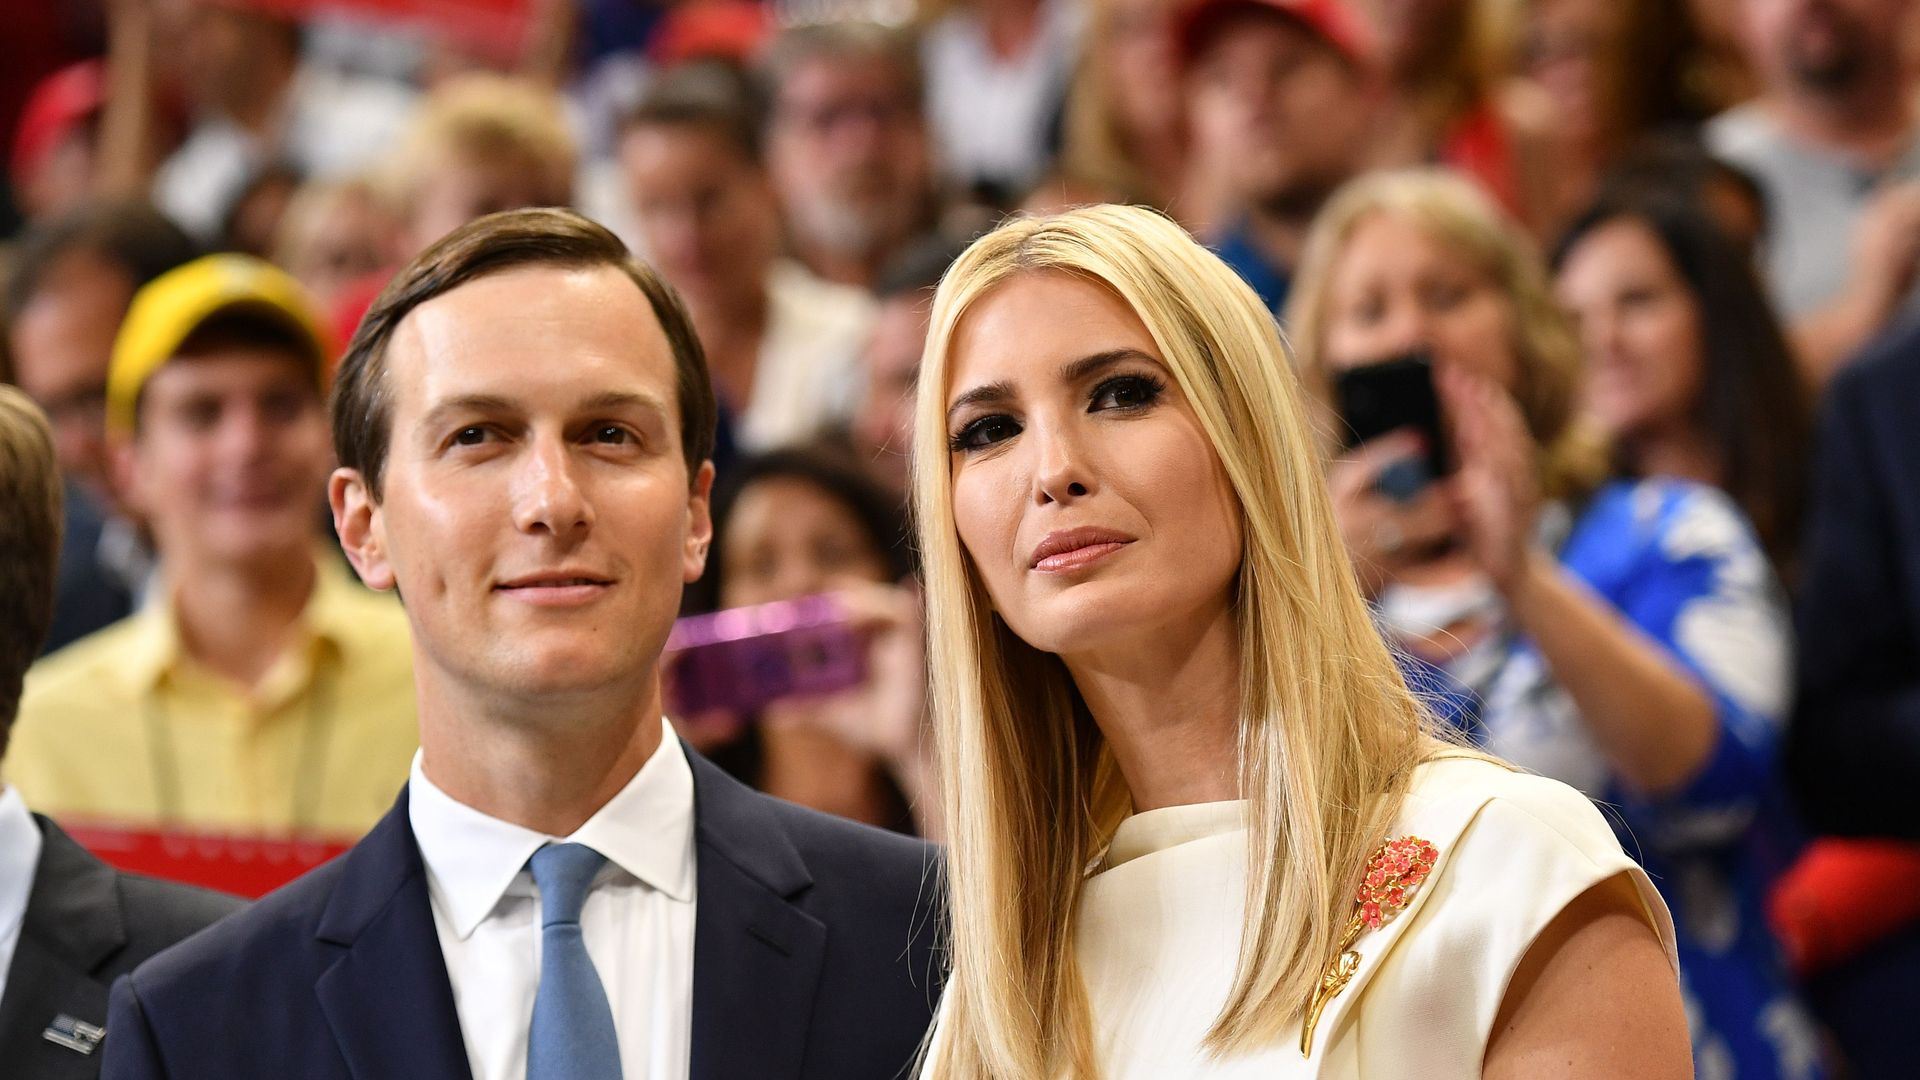 Jared Kushner (L) and Ivanka Trump arrive for the official launch of the Trump 2020 campaign.